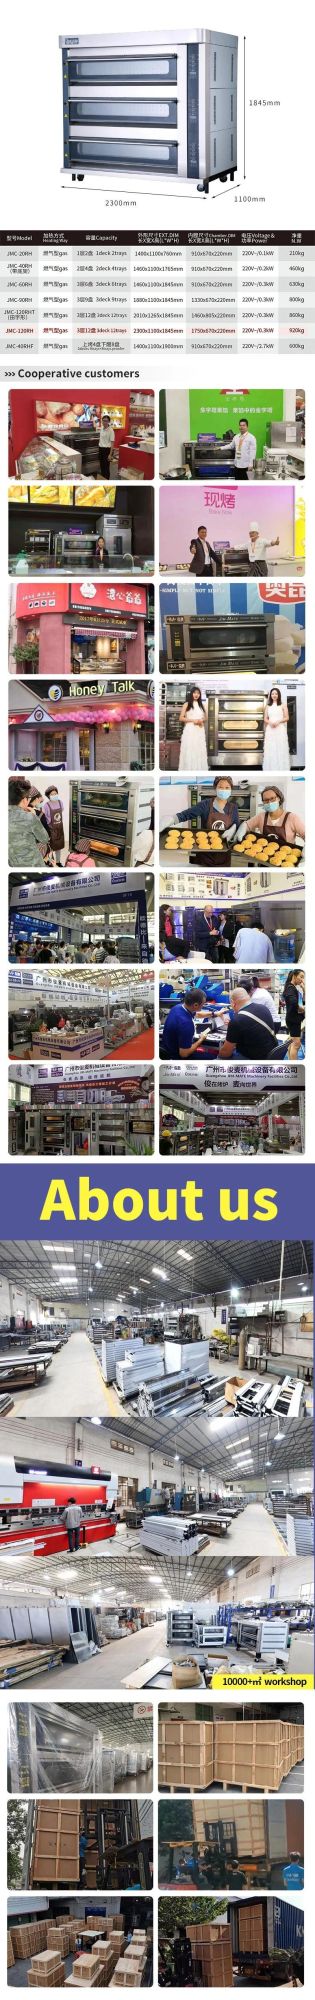 Commercial Kitchen 3 Deck 12 Trays Gas Oven for Baking Equipment Bakery Machine Food Machinery Bread Machine Equiped with Timer (Discount)